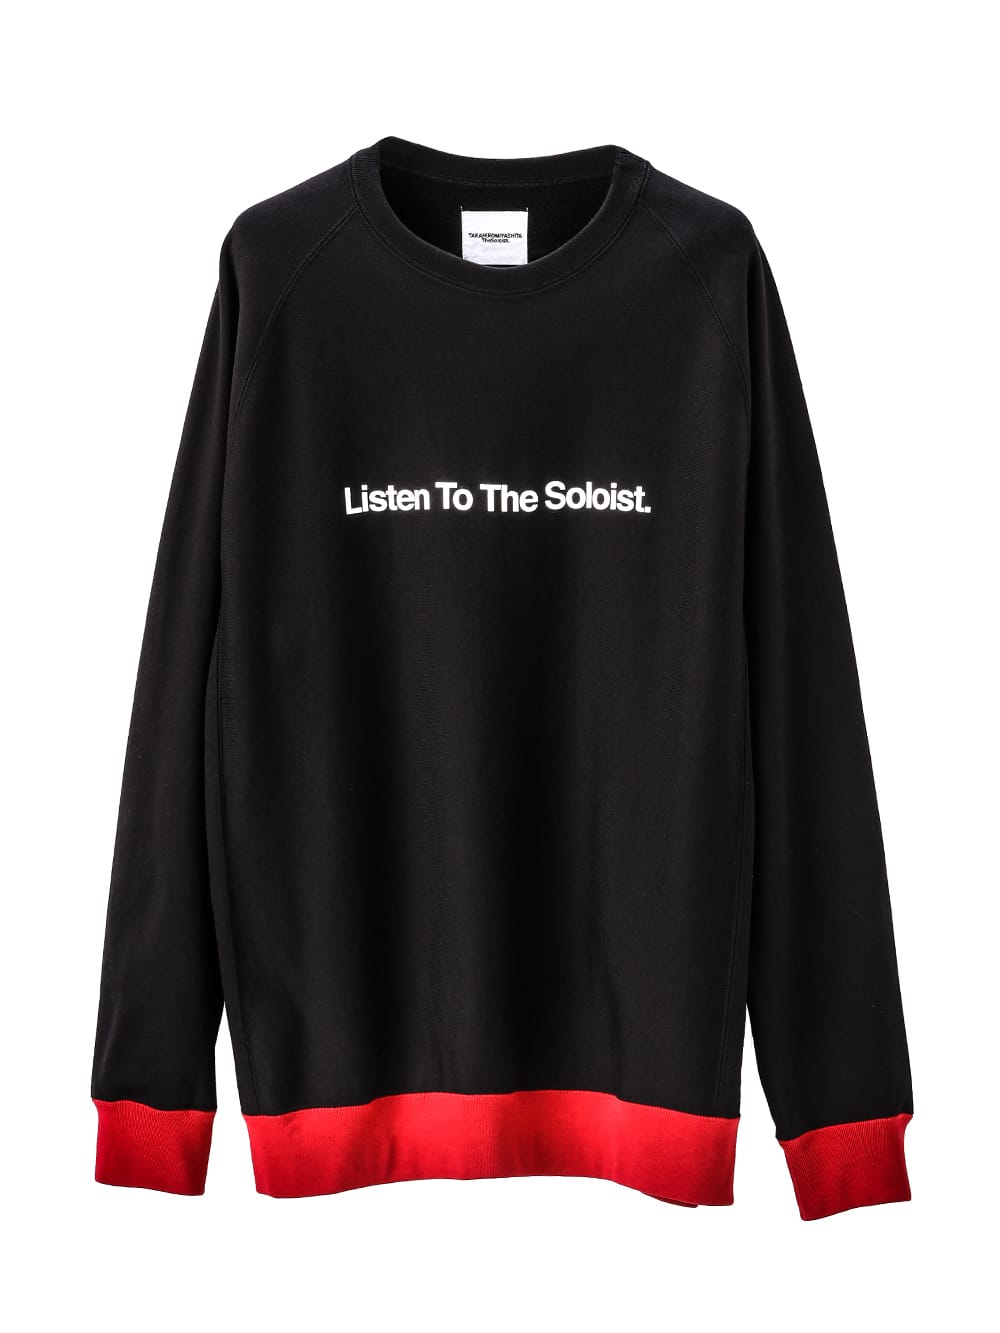 sxc.0001-black×red Listen To The Soloist.(oversized bicolor 